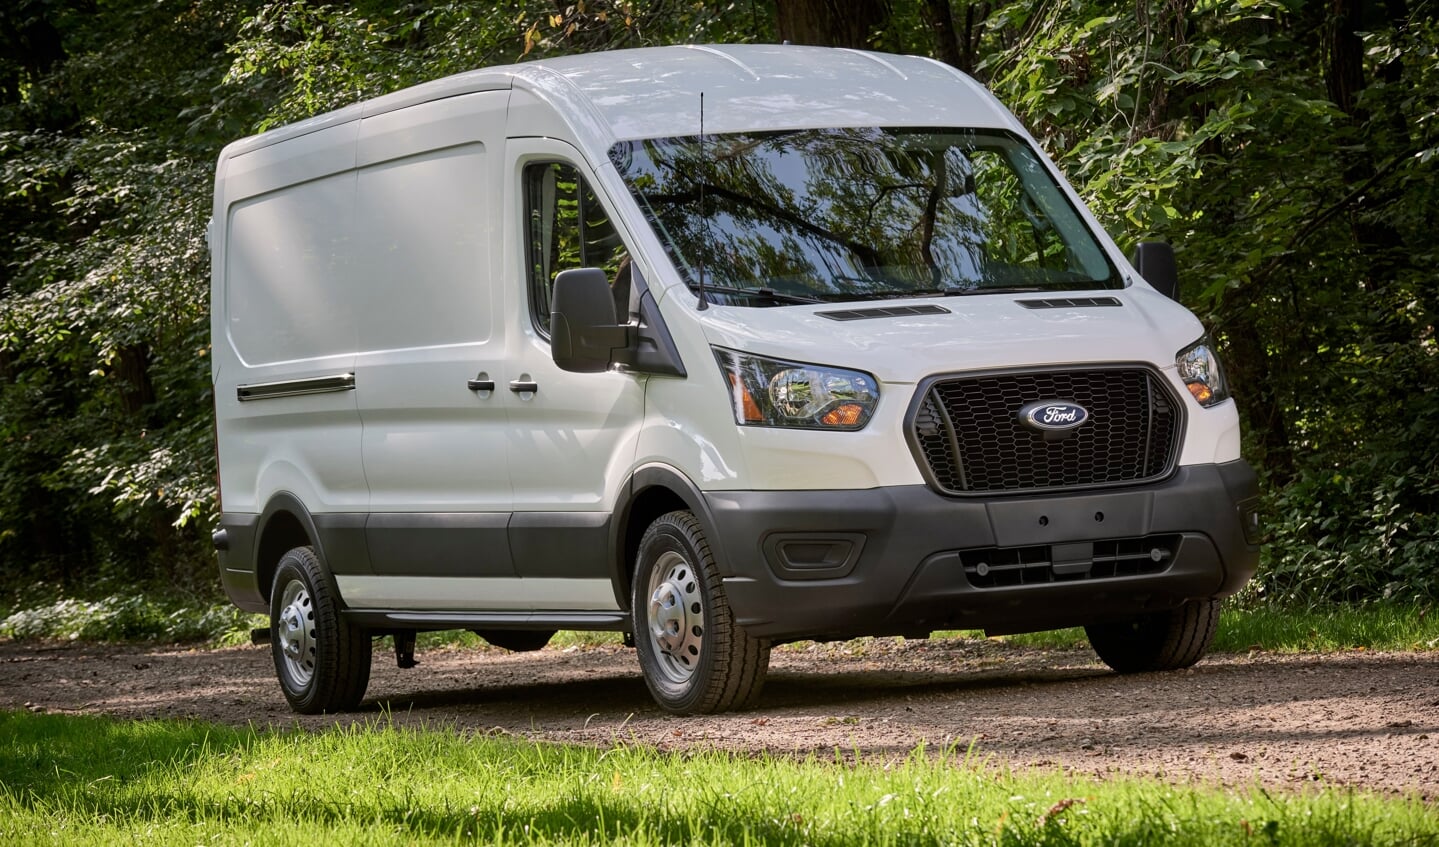 New for 2021 model year, America’s best-selling van – Ford Transit – is updated with recreational vehicle and parcel delivery option packages for those who work hard and play hard. Ford is making it simpler for outdoor enthusiasts to order 2021 Transit their way by creating all-new Adventure Prep and RV Prep packages, while fleets and entrepreneurs get new business-oriented Parcel Delivery and Livery packages.